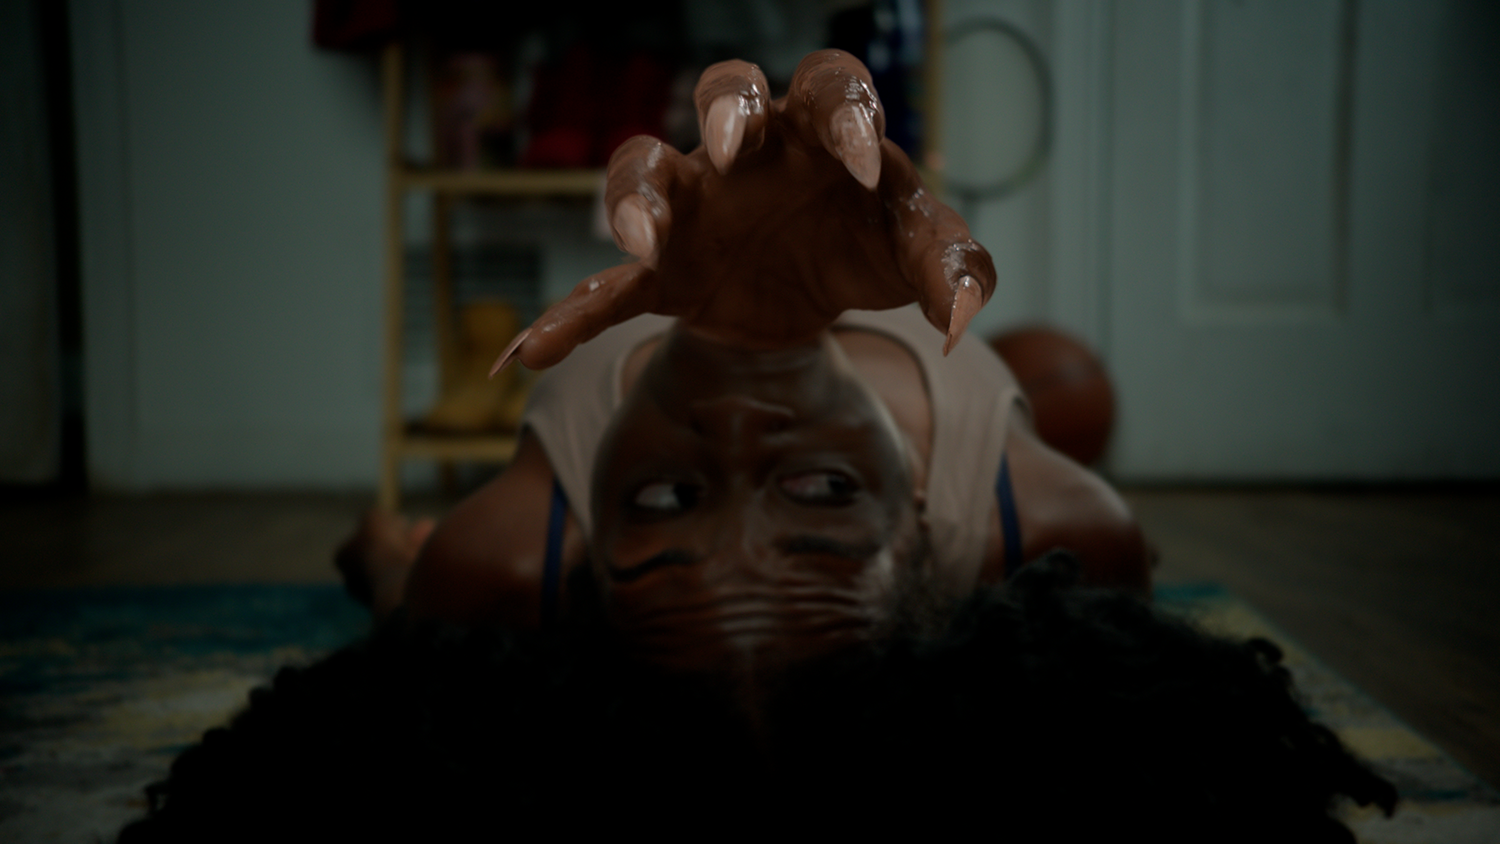 A scene from Inner Demons with VFX completed by Foxtrot X-Ray